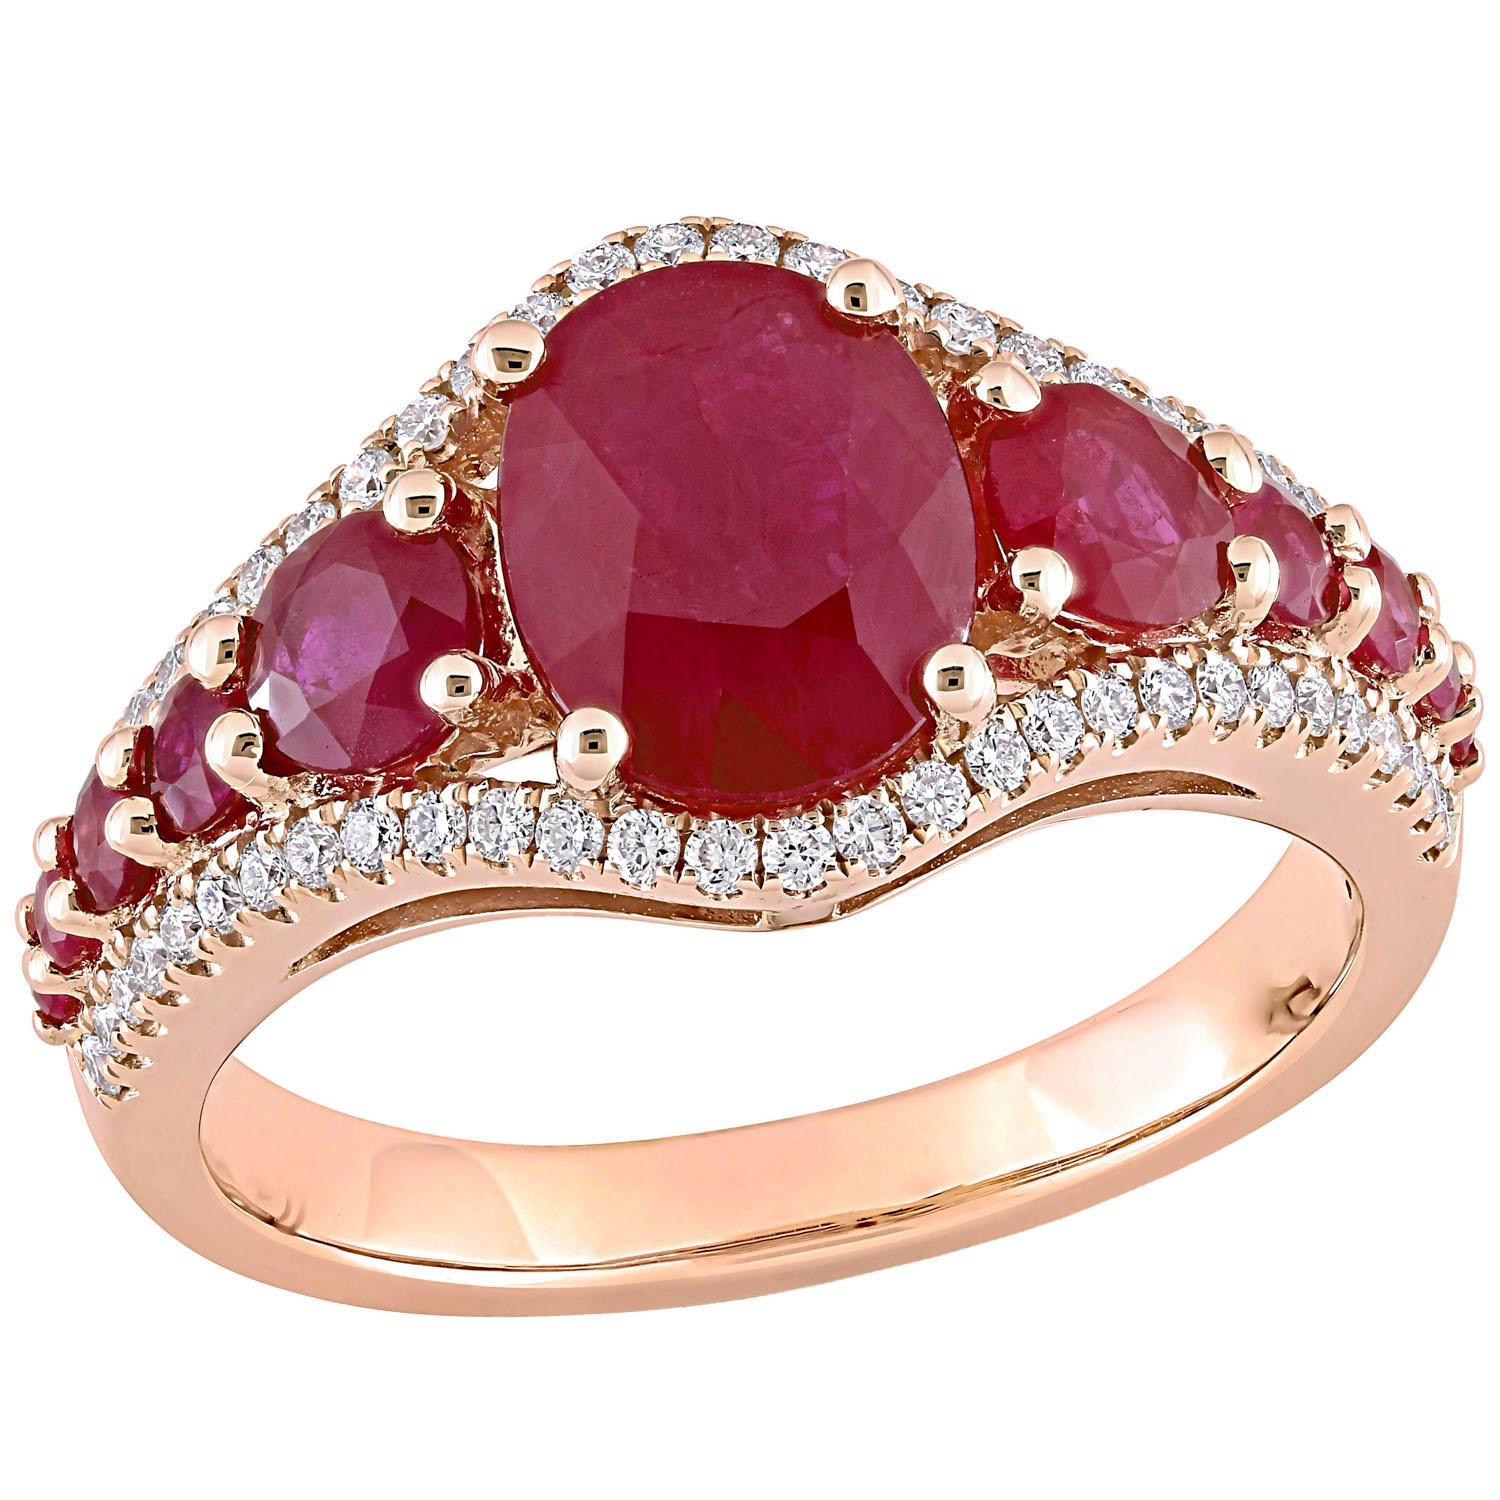 Allura 3.42 CT. T.G.W Ruby and 0.29 CT. T.W Diamond Engagement Ring in 14k Rose Gold 7.5